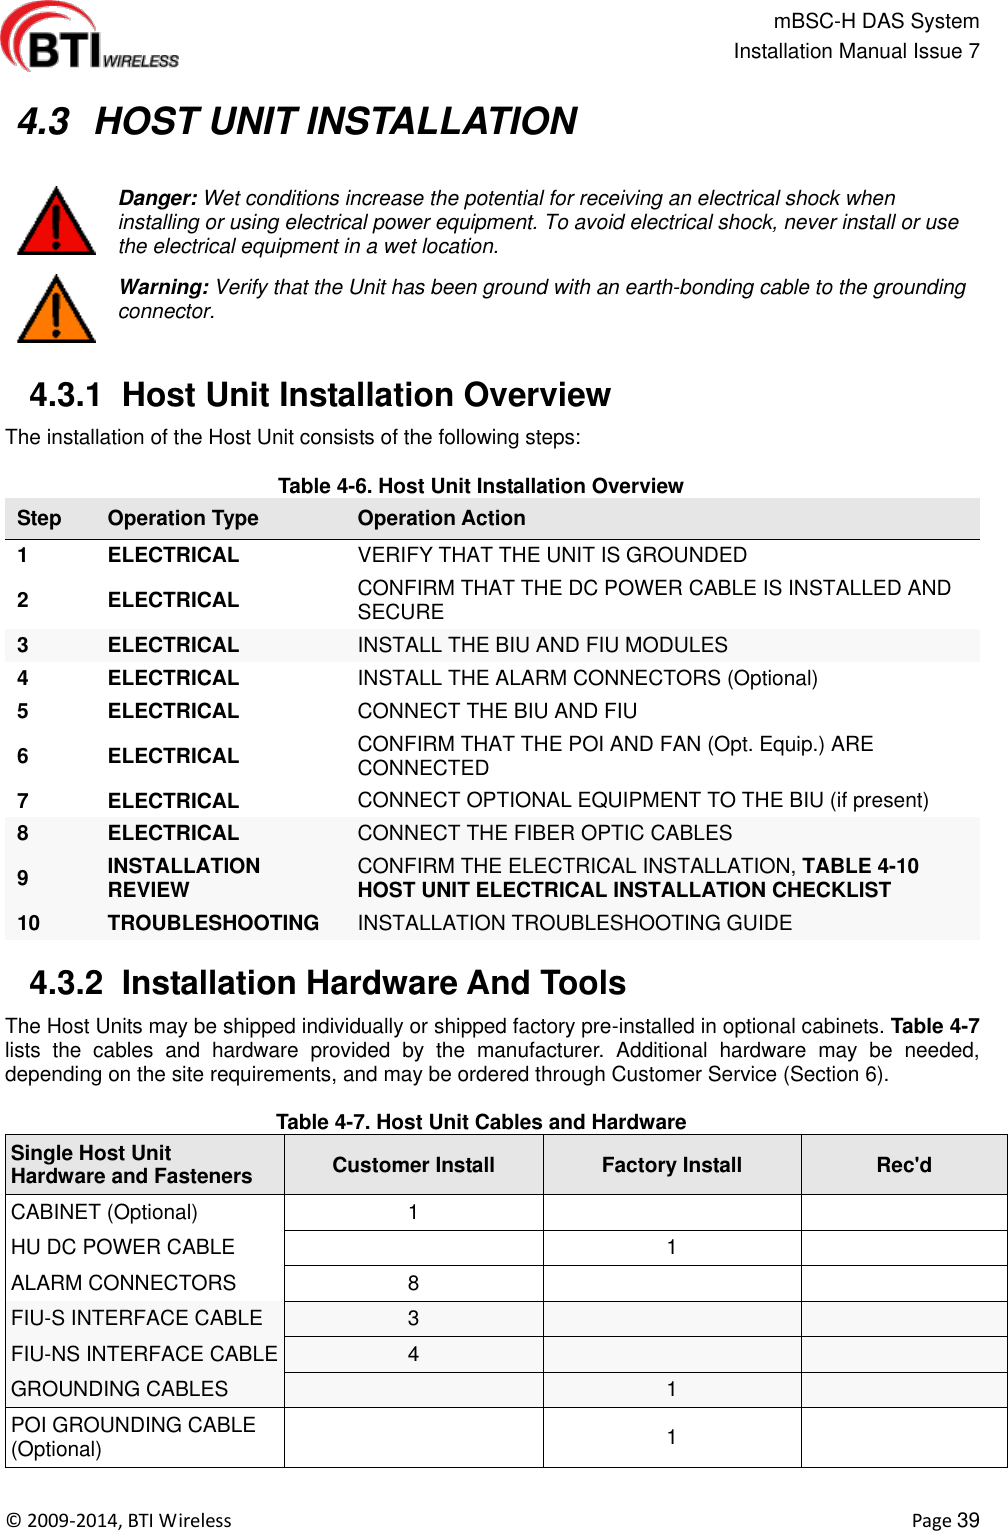                                                   mBSC-H DAS System   Installation Manual Issue 7  ©  2009-2014, BTI Wireless    Page 39   4.3  HOST UNIT INSTALLATION   Danger: Wet conditions increase the potential for receiving an electrical shock when installing or using electrical power equipment. To avoid electrical shock, never install or use the electrical equipment in a wet location.  Warning: Verify that the Unit has been ground with an earth-bonding cable to the grounding connector.   4.3.1  Host Unit Installation Overview The installation of the Host Unit consists of the following steps:  Table 4-6. Host Unit Installation Overview Step Operation Type Operation Action 1 ELECTRICAL VERIFY THAT THE UNIT IS GROUNDED 2 ELECTRICAL CONFIRM THAT THE DC POWER CABLE IS INSTALLED AND SECURE 3 ELECTRICAL INSTALL THE BIU AND FIU MODULES 4 ELECTRICAL INSTALL THE ALARM CONNECTORS (Optional) 5 ELECTRICAL CONNECT THE BIU AND FIU 6 ELECTRICAL CONFIRM THAT THE POI AND FAN (Opt. Equip.) ARE CONNECTED 7 ELECTRICAL CONNECT OPTIONAL EQUIPMENT TO THE BIU (if present) 8 ELECTRICAL CONNECT THE FIBER OPTIC CABLES 9 INSTALLATION REVIEW CONFIRM THE ELECTRICAL INSTALLATION, TABLE 4-10 HOST UNIT ELECTRICAL INSTALLATION CHECKLIST 10 TROUBLESHOOTING INSTALLATION TROUBLESHOOTING GUIDE   4.3.2  Installation Hardware And Tools The Host Units may be shipped individually or shipped factory pre-installed in optional cabinets. Table 4-7 lists  the  cables  and  hardware  provided  by  the  manufacturer.  Additional  hardware  may  be  needed, depending on the site requirements, and may be ordered through Customer Service (Section 6).  Table 4-7. Host Unit Cables and Hardware Single Host Unit   Hardware and Fasteners Customer Install Factory Install Rec&apos;d CABINET (Optional) 1   HU DC POWER CABLE  1  ALARM CONNECTORS 8   FIU-S INTERFACE CABLE 3   FIU-NS INTERFACE CABLE 4   GROUNDING CABLES  1  POI GROUNDING CABLE (Optional)  1  